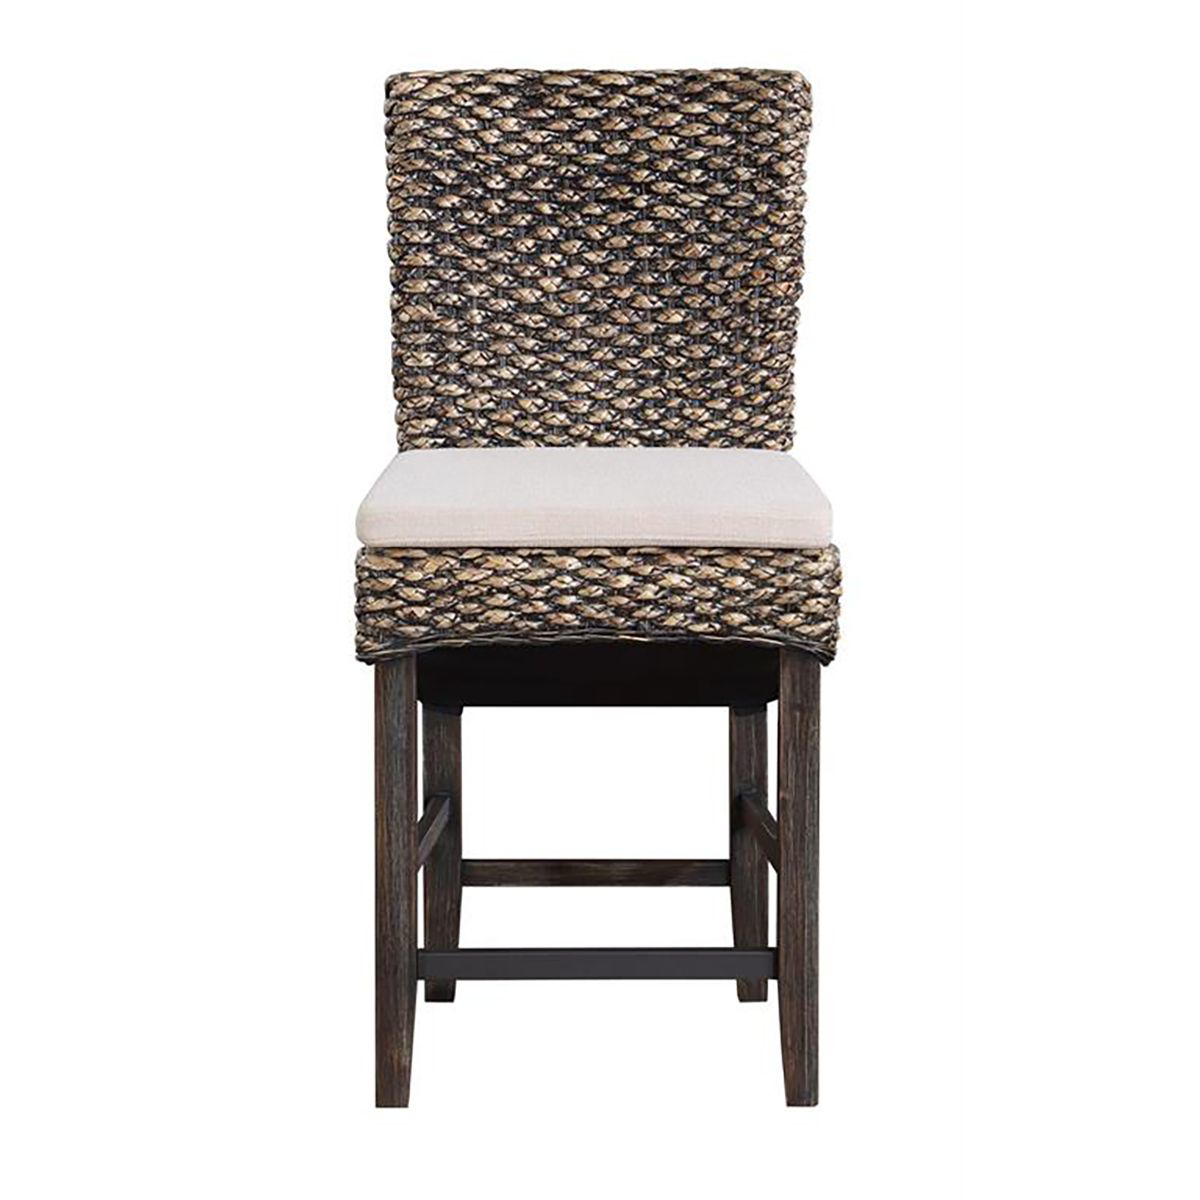 Picture of RAFFIA COUNTER HEIGHT STOOL